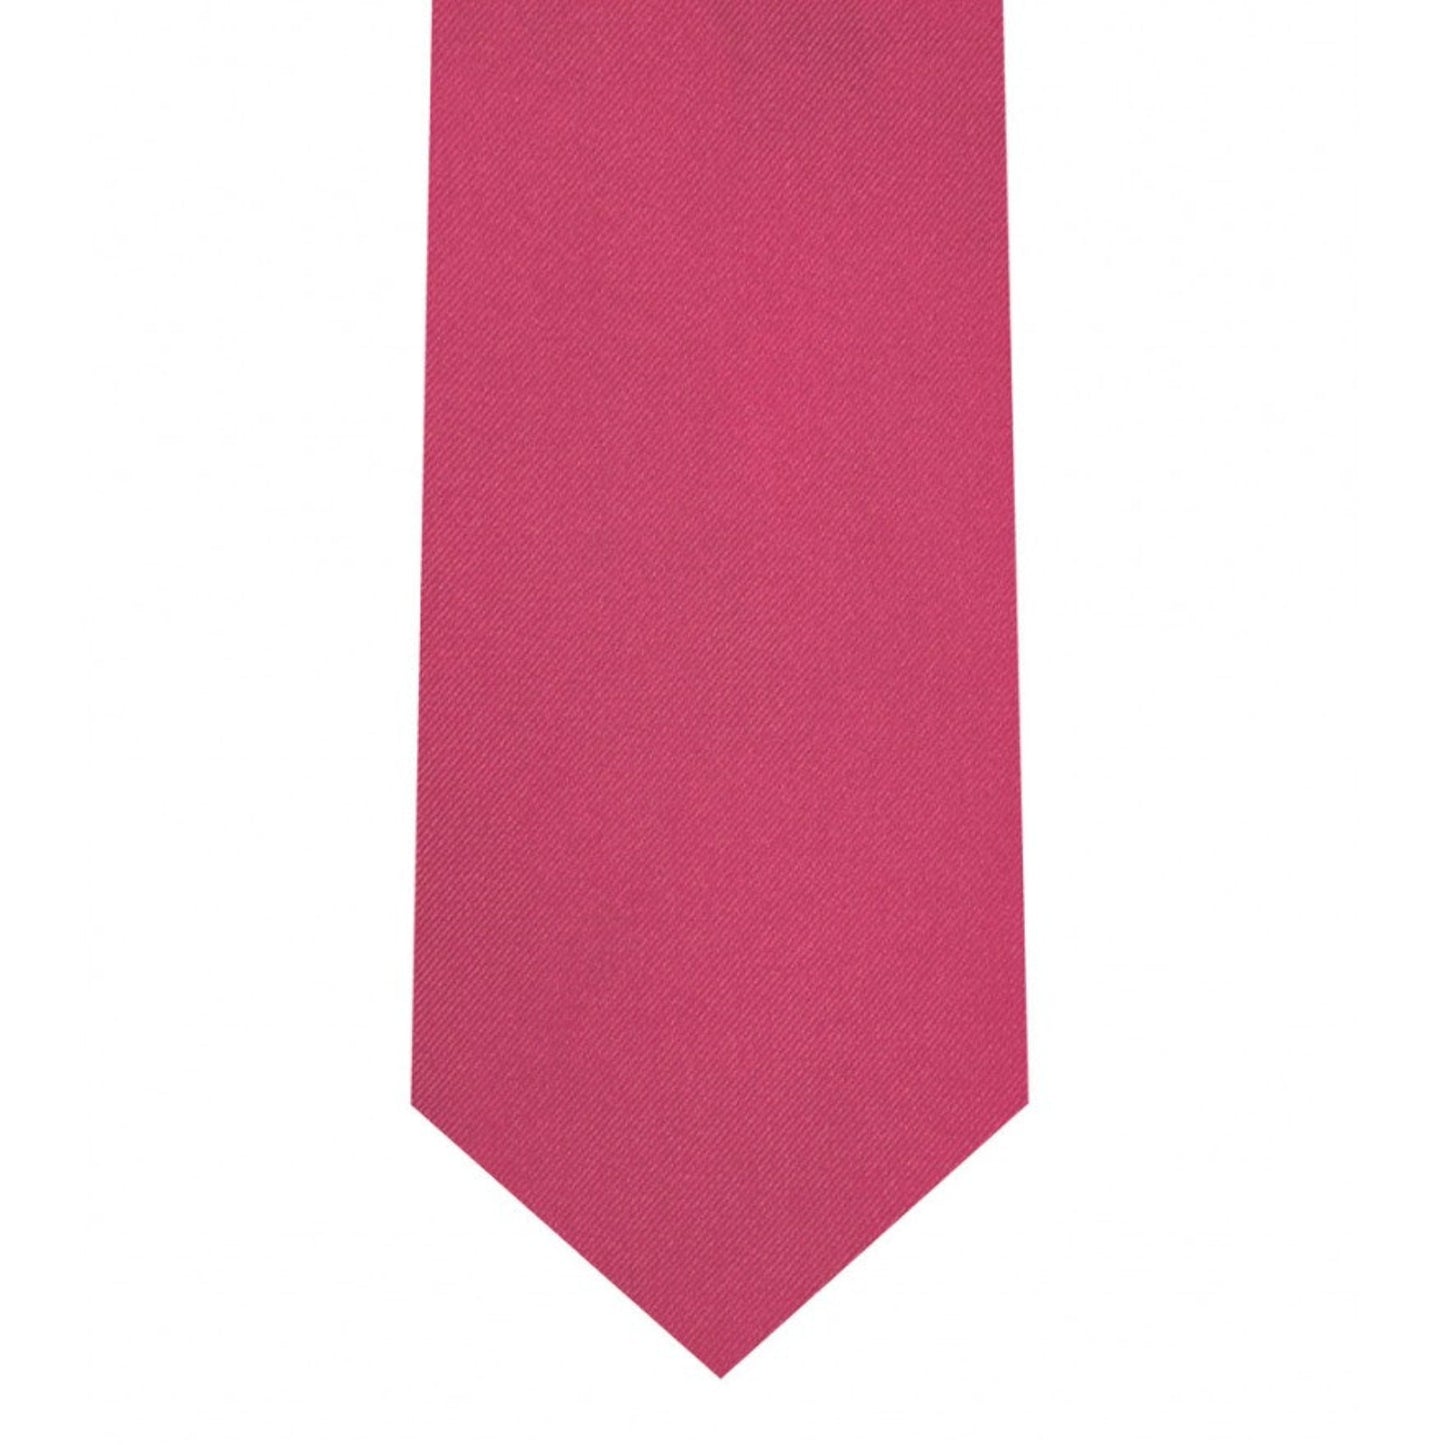 Classic French Rose Tie Skinny width 2.75 inches With Matching Pocket Square | KCT Menswear